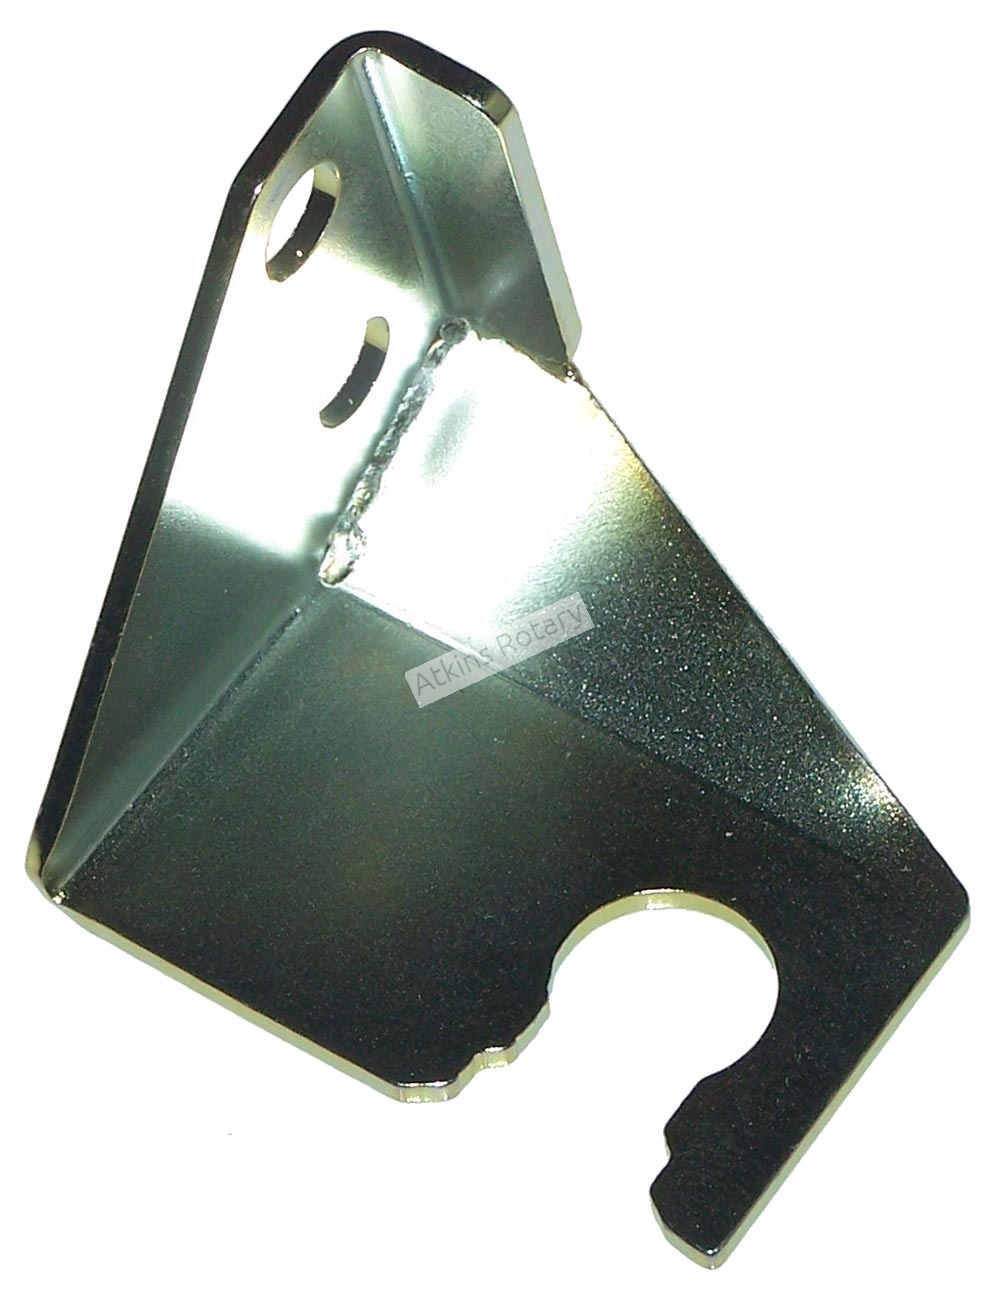 93-95 Rx7 Throttle Cable Bracket (N3A1-13-661)